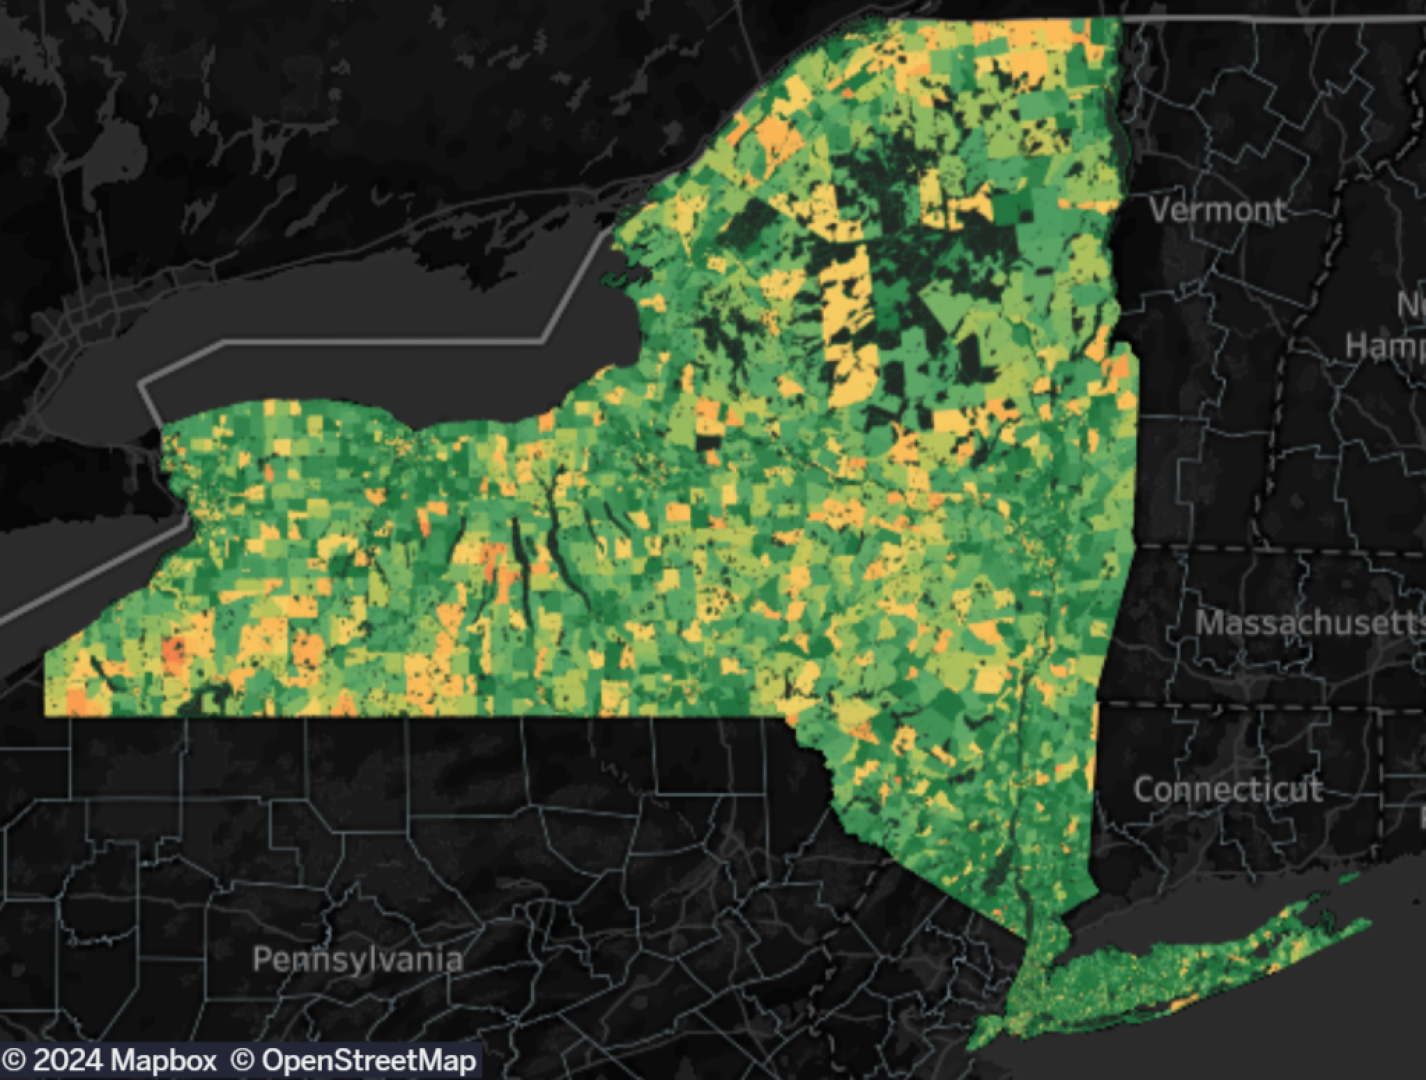 Join webinar (5/24): Broadband for All? Mapping and Discussing Progress and Remaining Challenges Across NYS